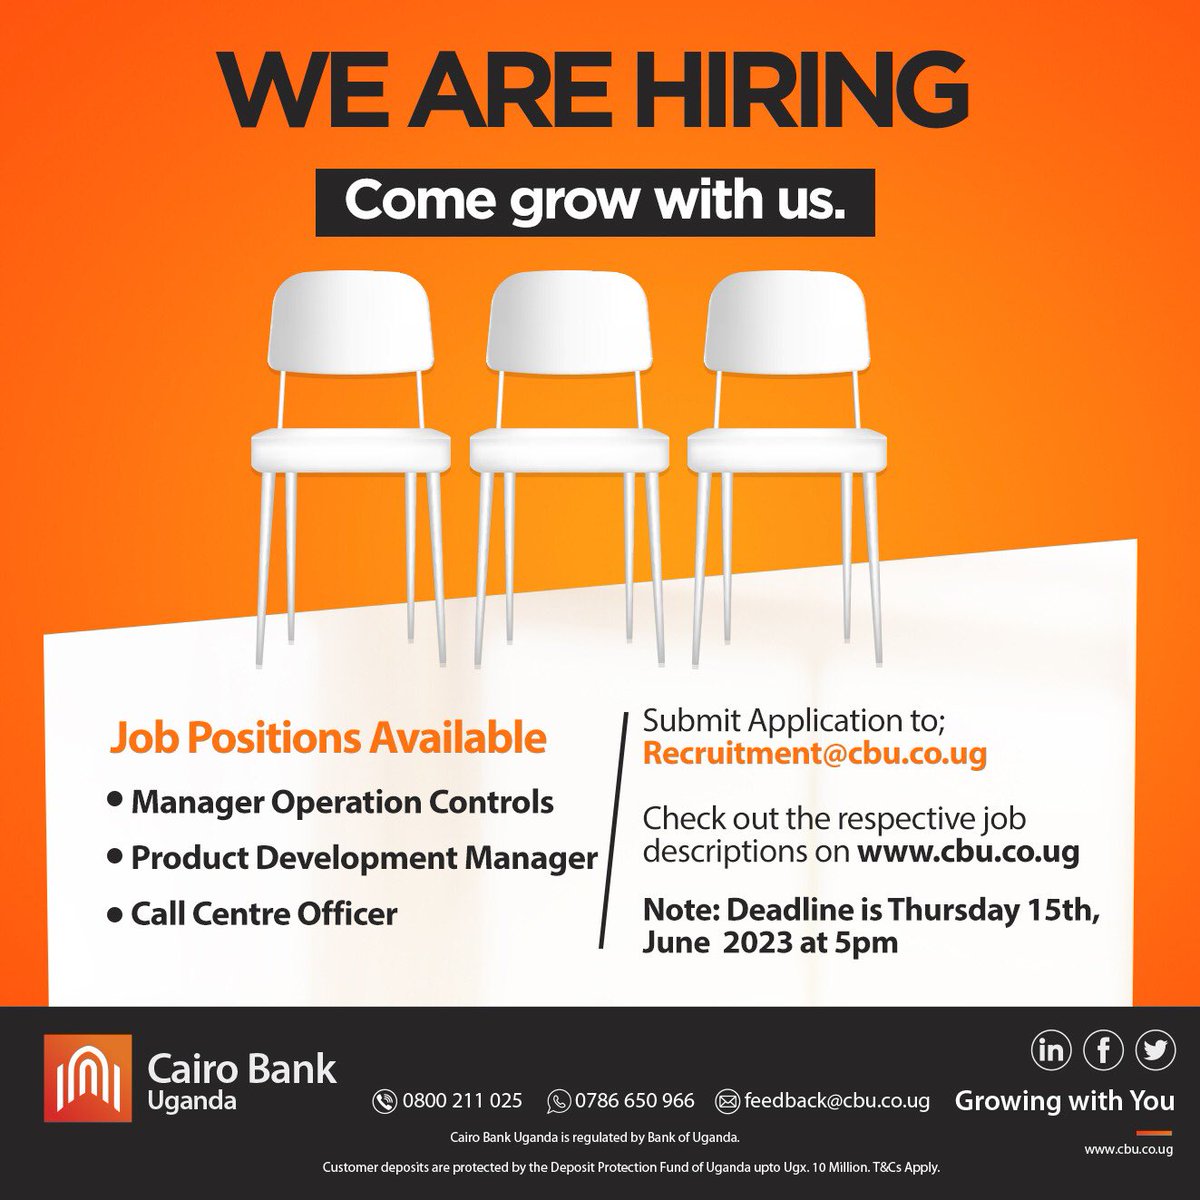 We are hiring 💼 

Are you out there & you have what it takes to join our team! 
Positions available include;
- Manager Operations Controls
- Product Development Manager
- Call Center Officer 

Submit application details to recruitment@cbu.co.ug